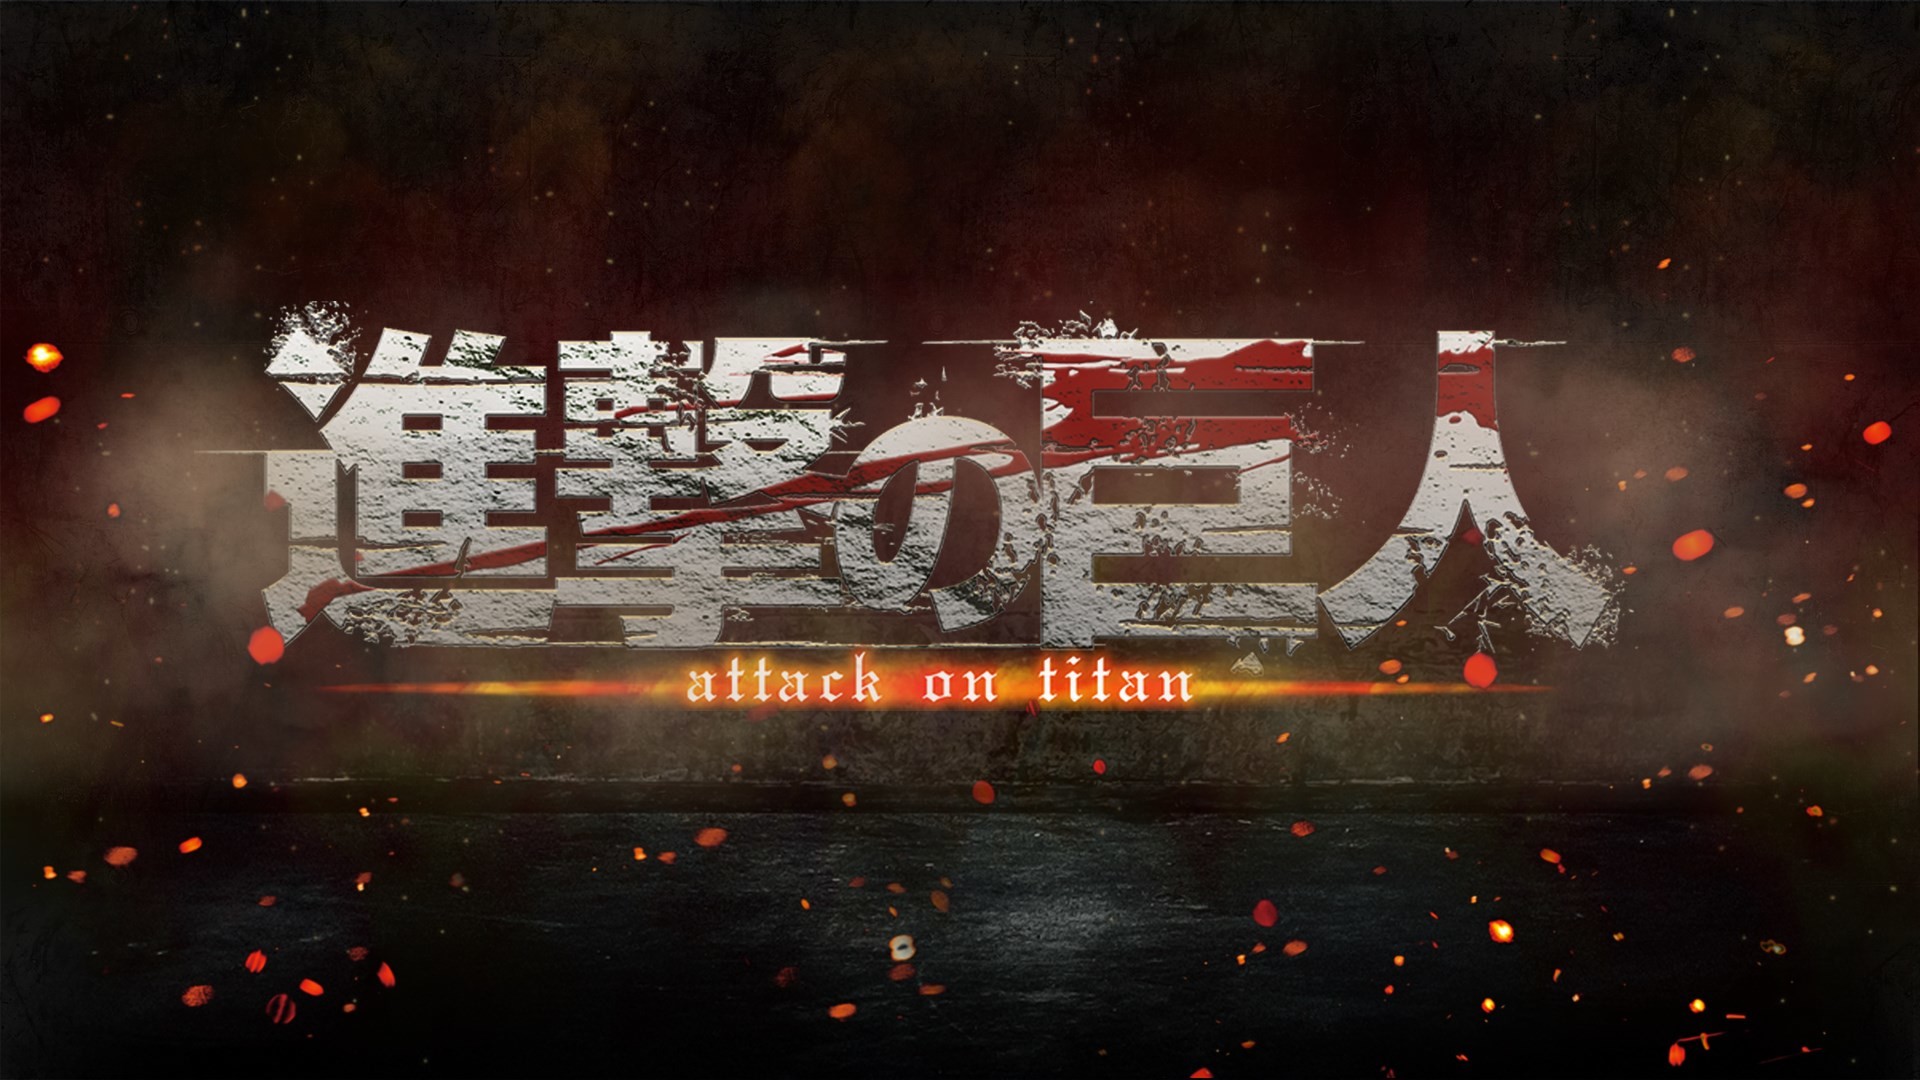 1920x1080 px attack on titan wallpaper for desktop background by Nash Leapman